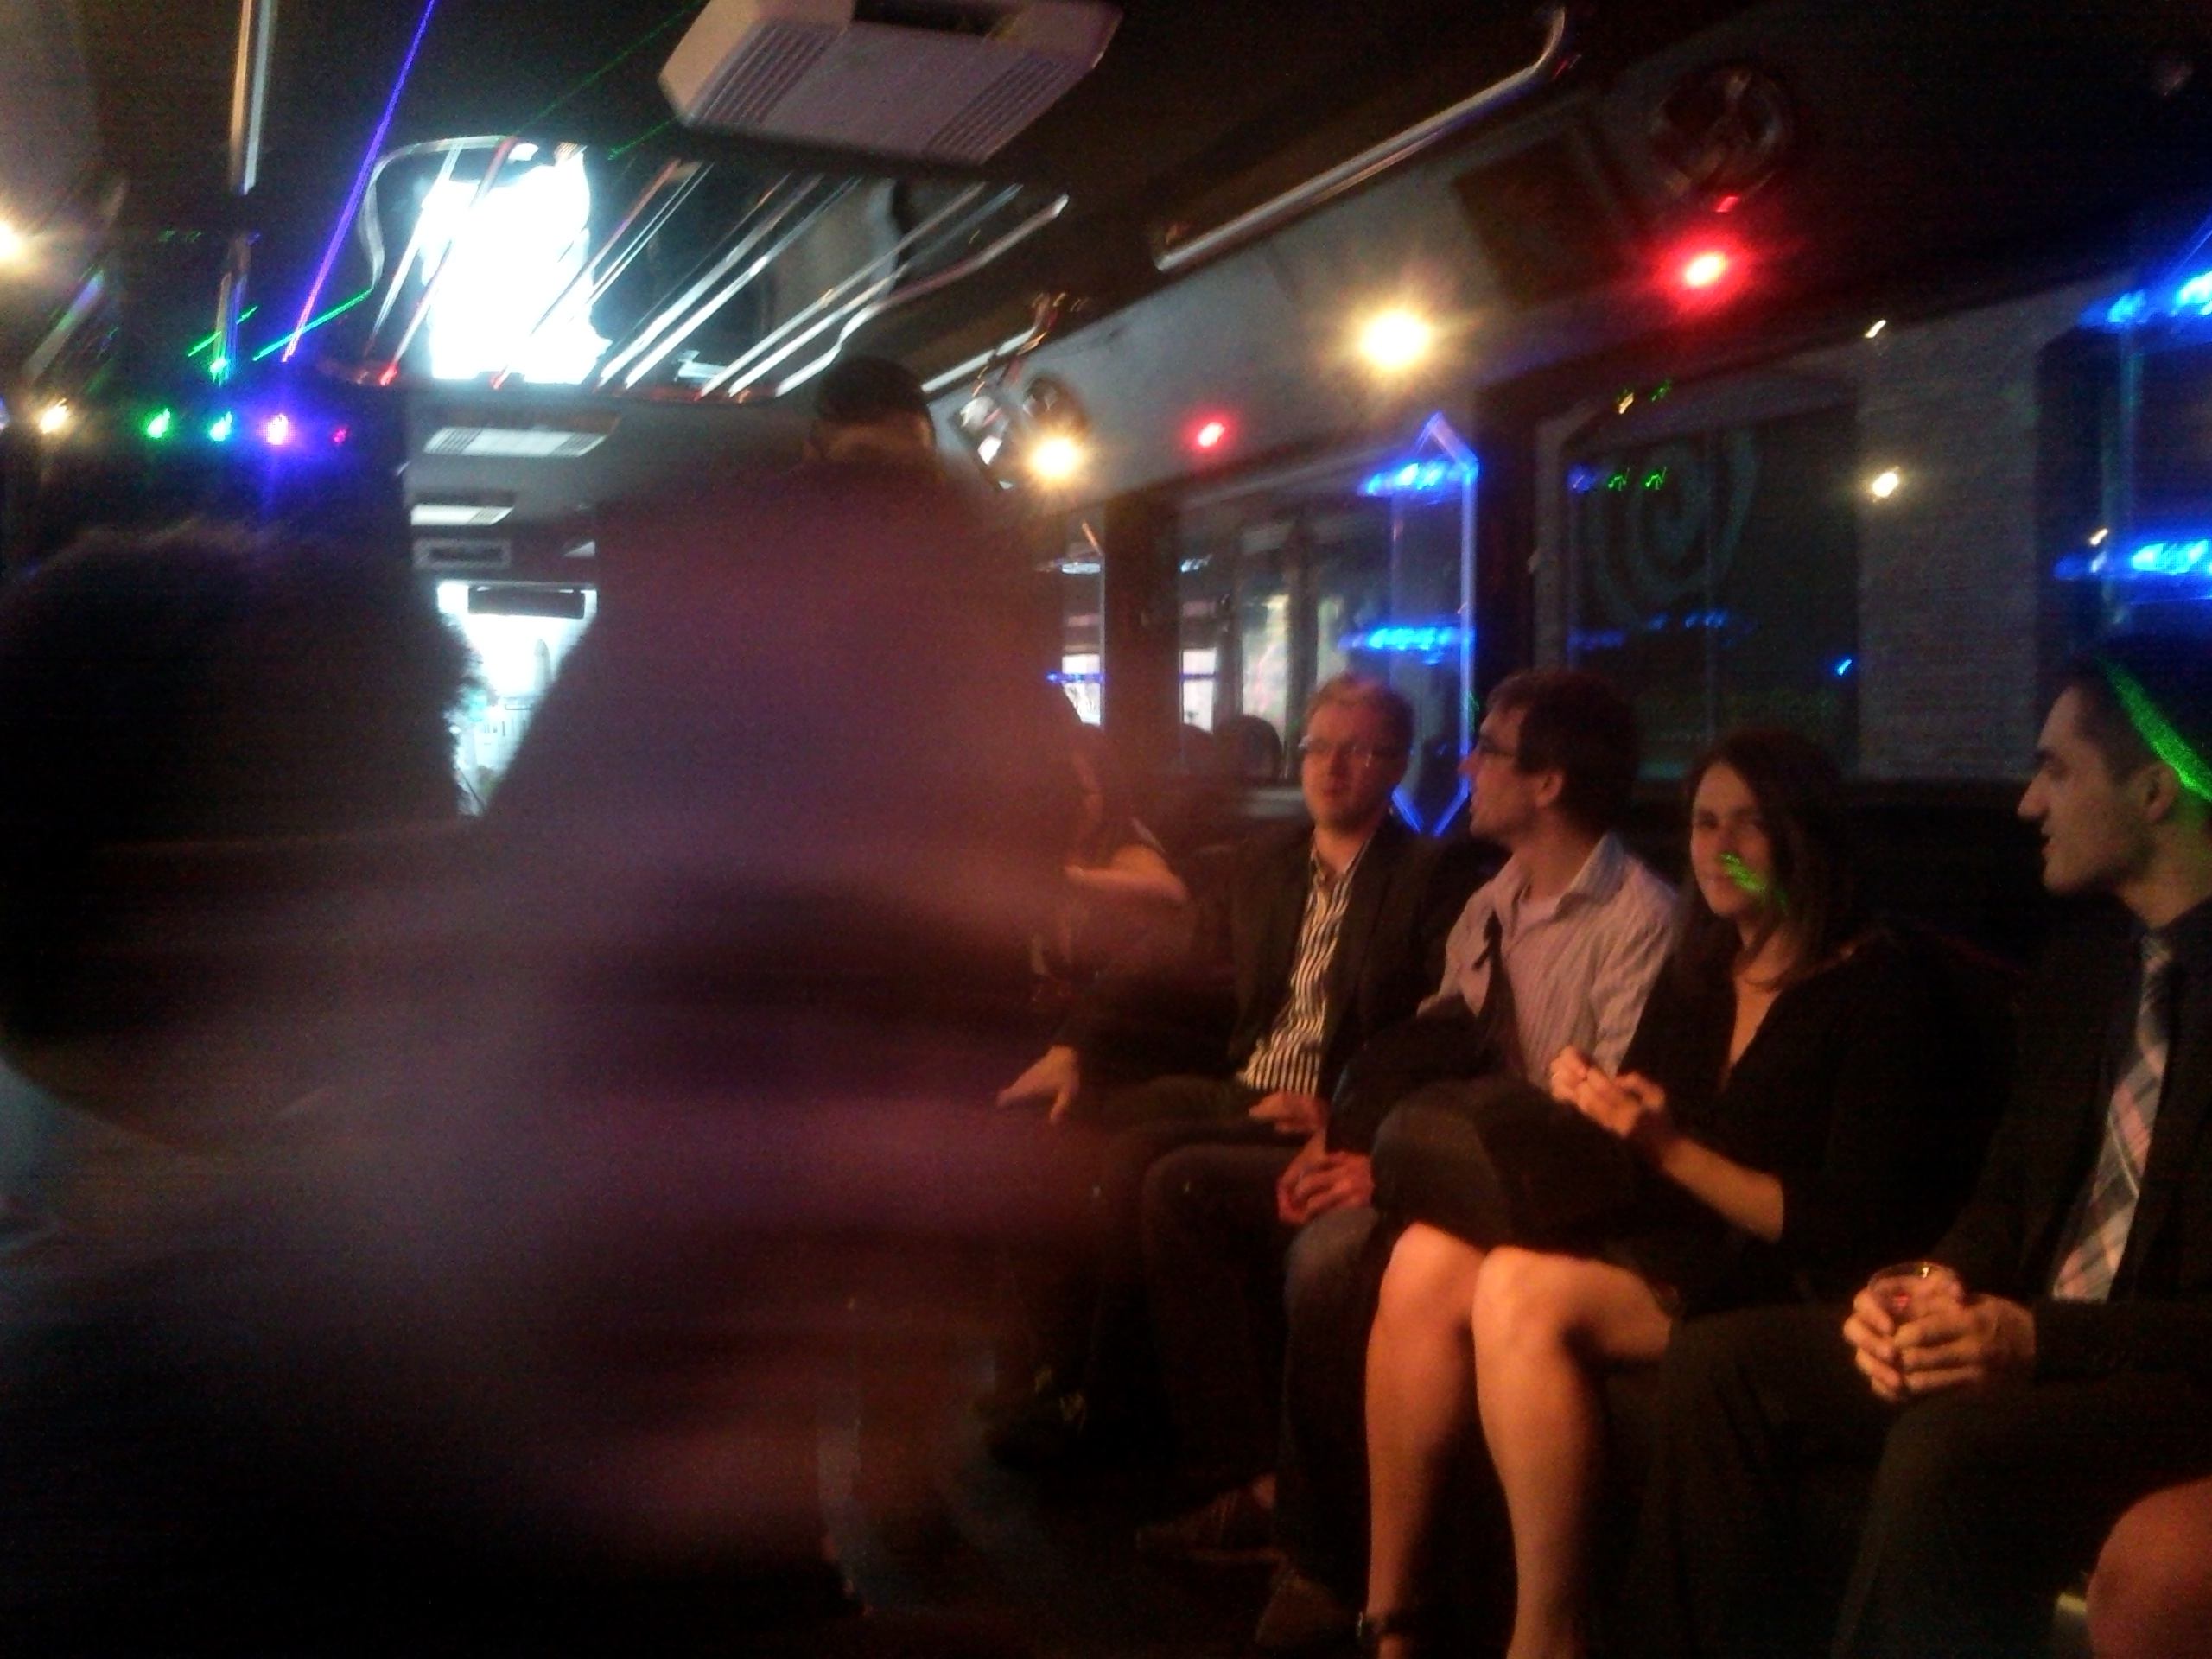 On the party bus - Vova just moved his head